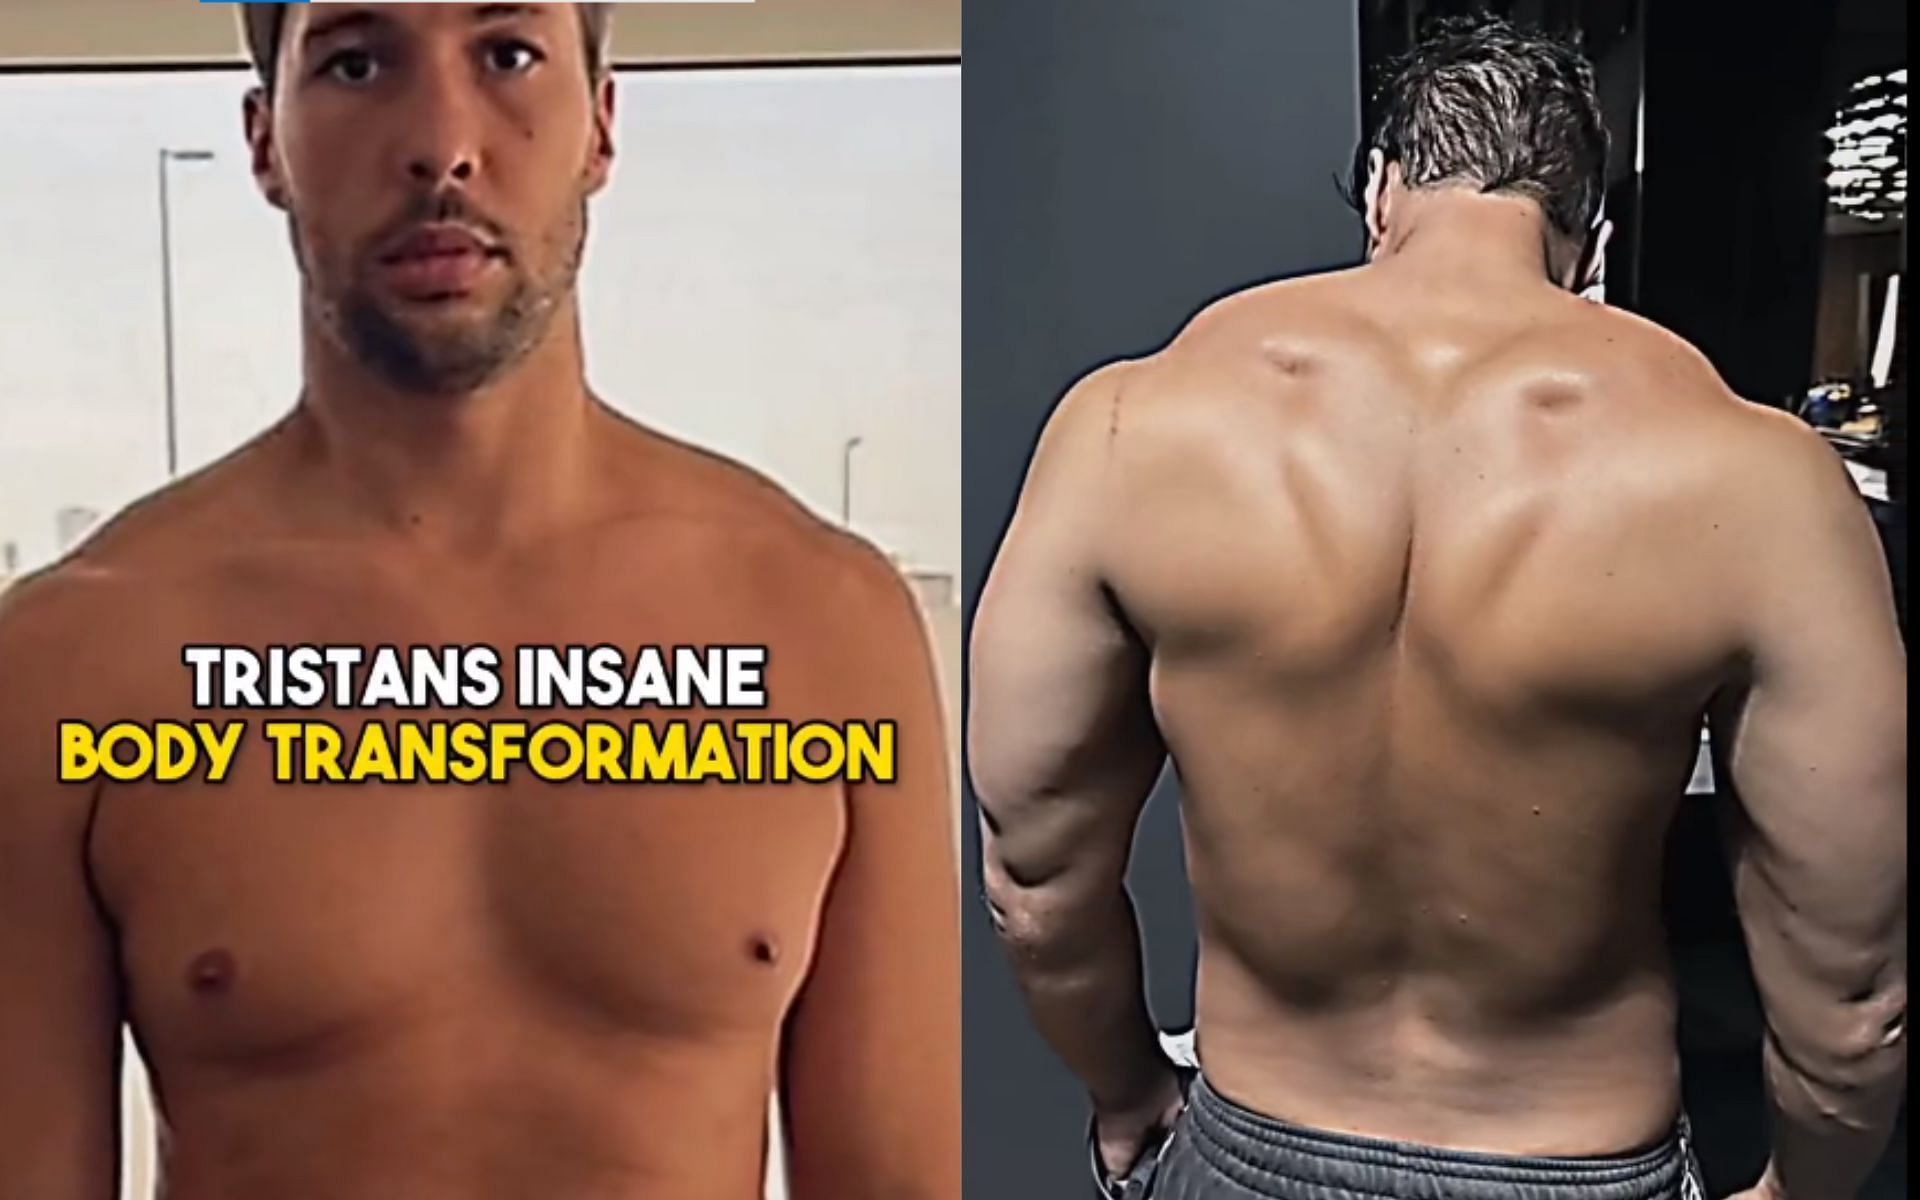 Tristan Tate before and after his body transformation [Image source: @alexstaofficial on Twitter]